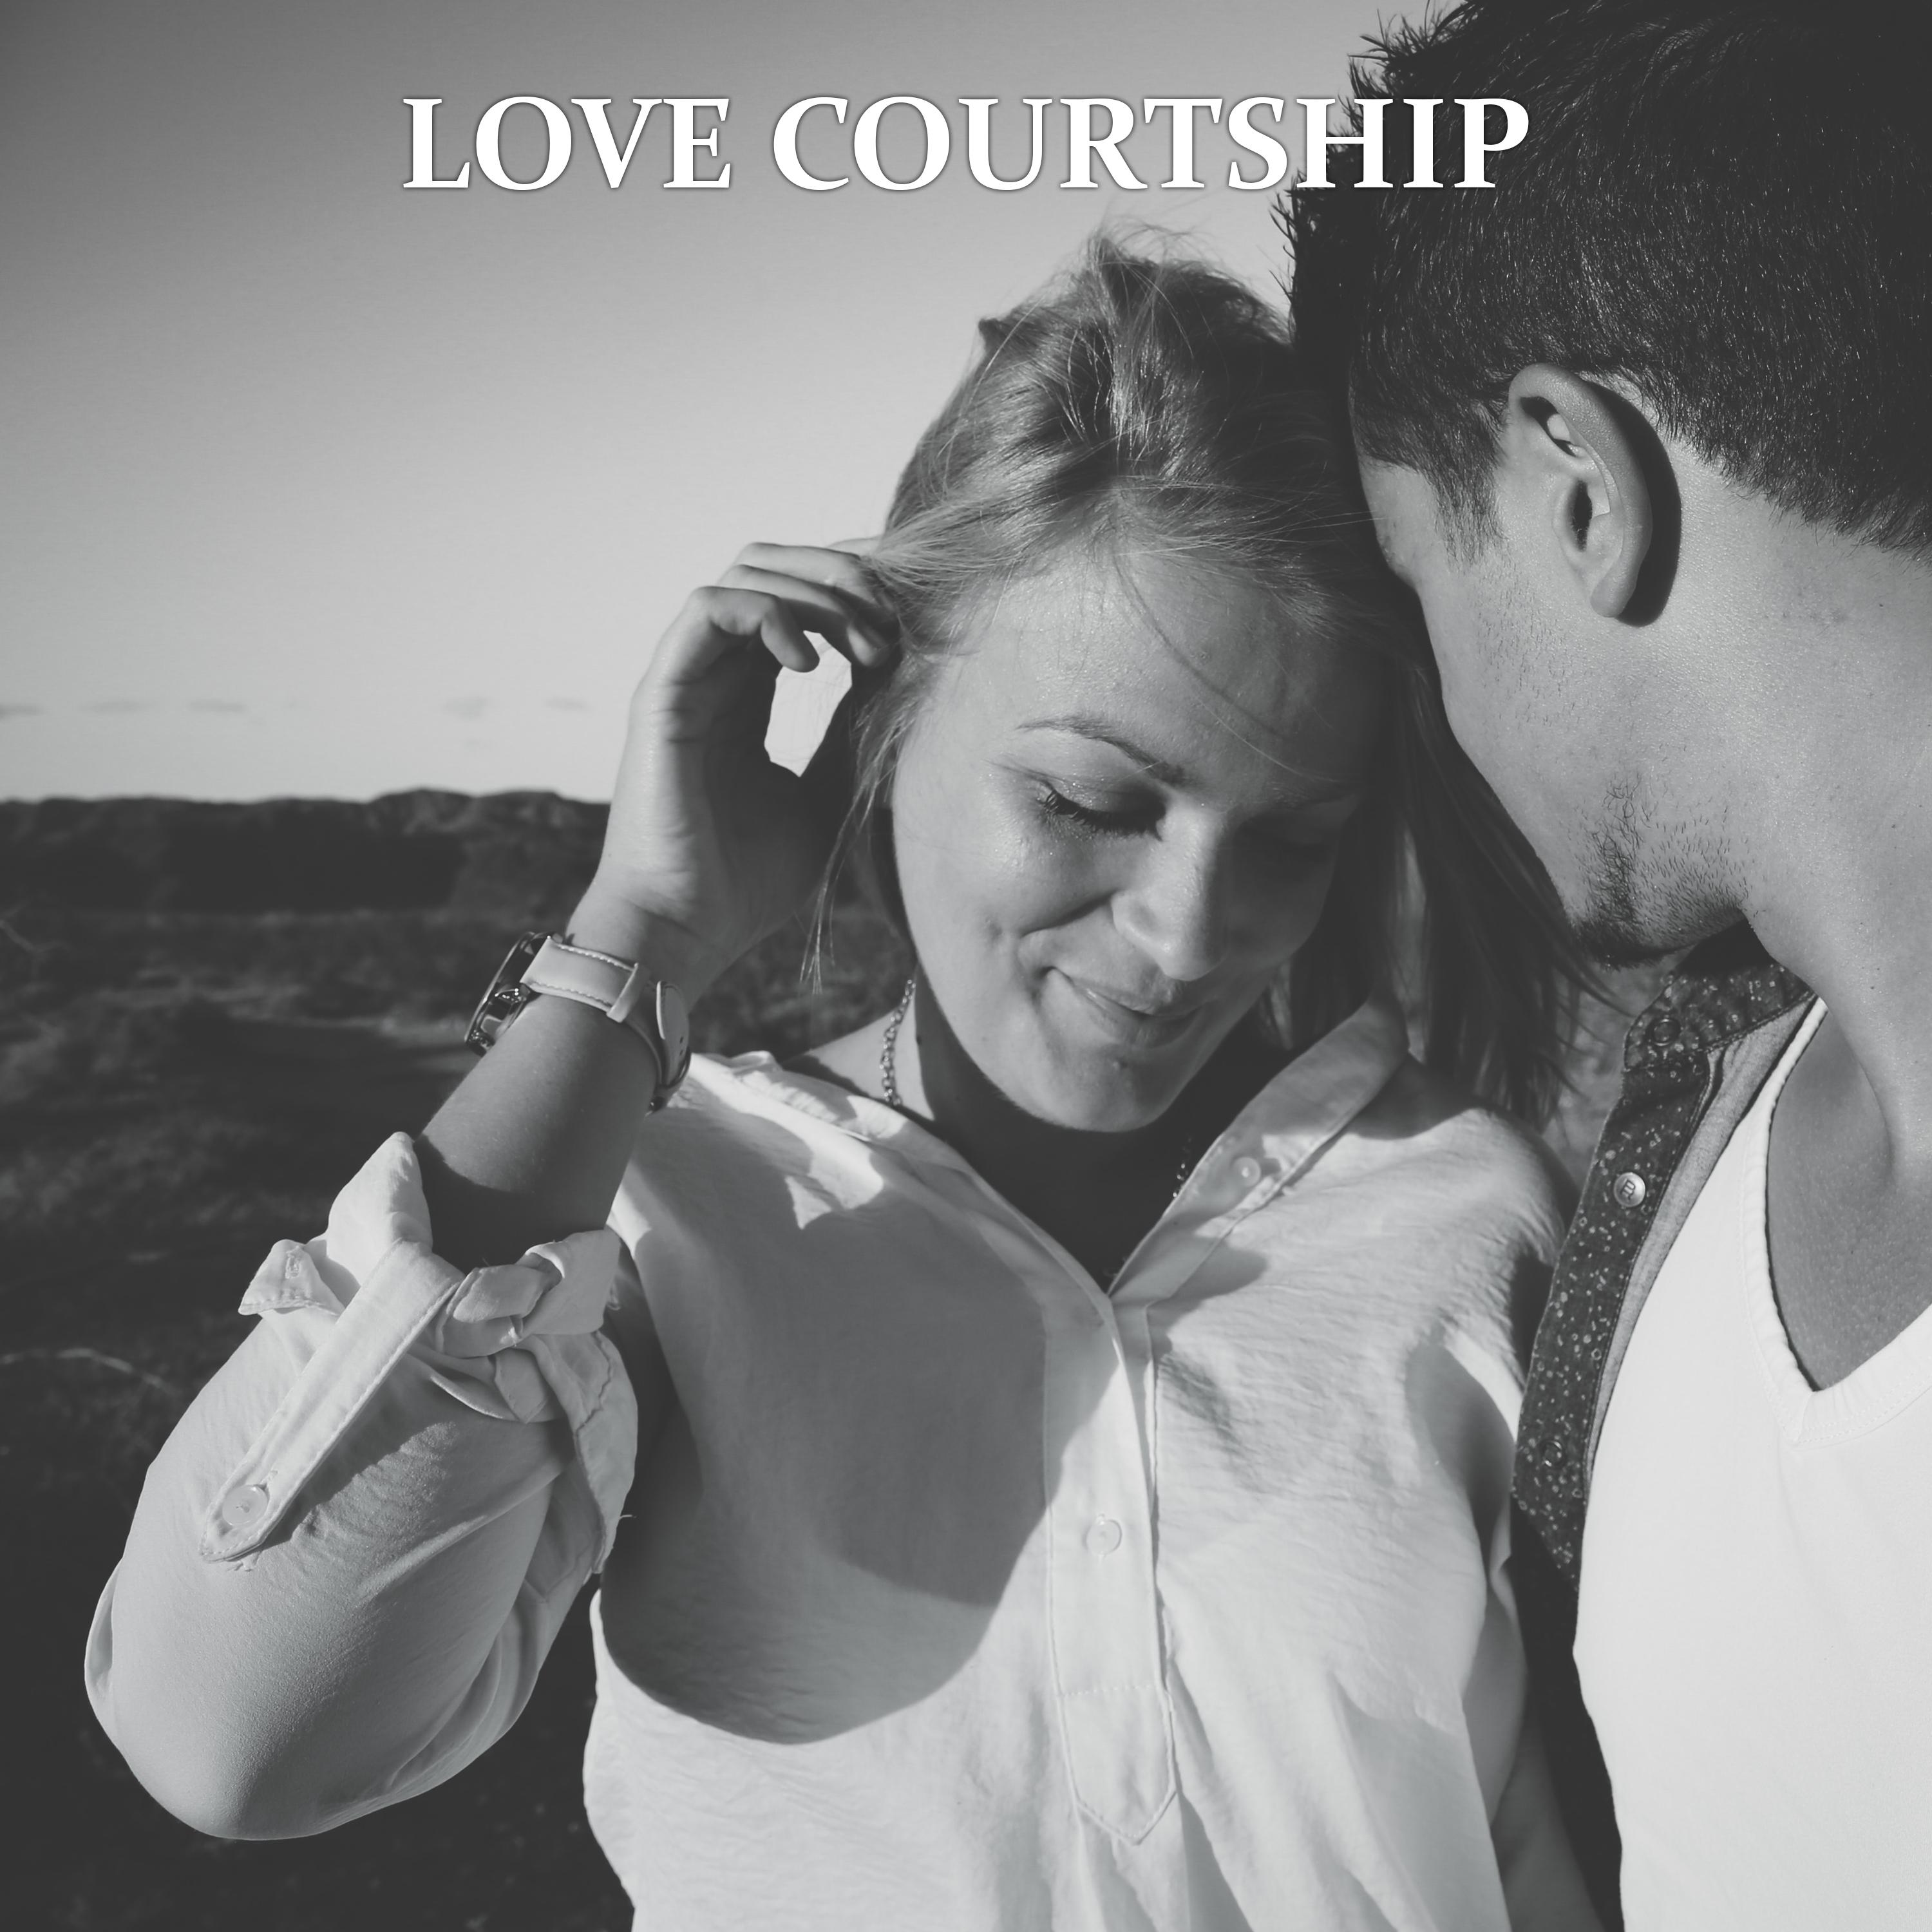 Love Courtship: Music for a Date, Dinner for Two or a Romantic Evening